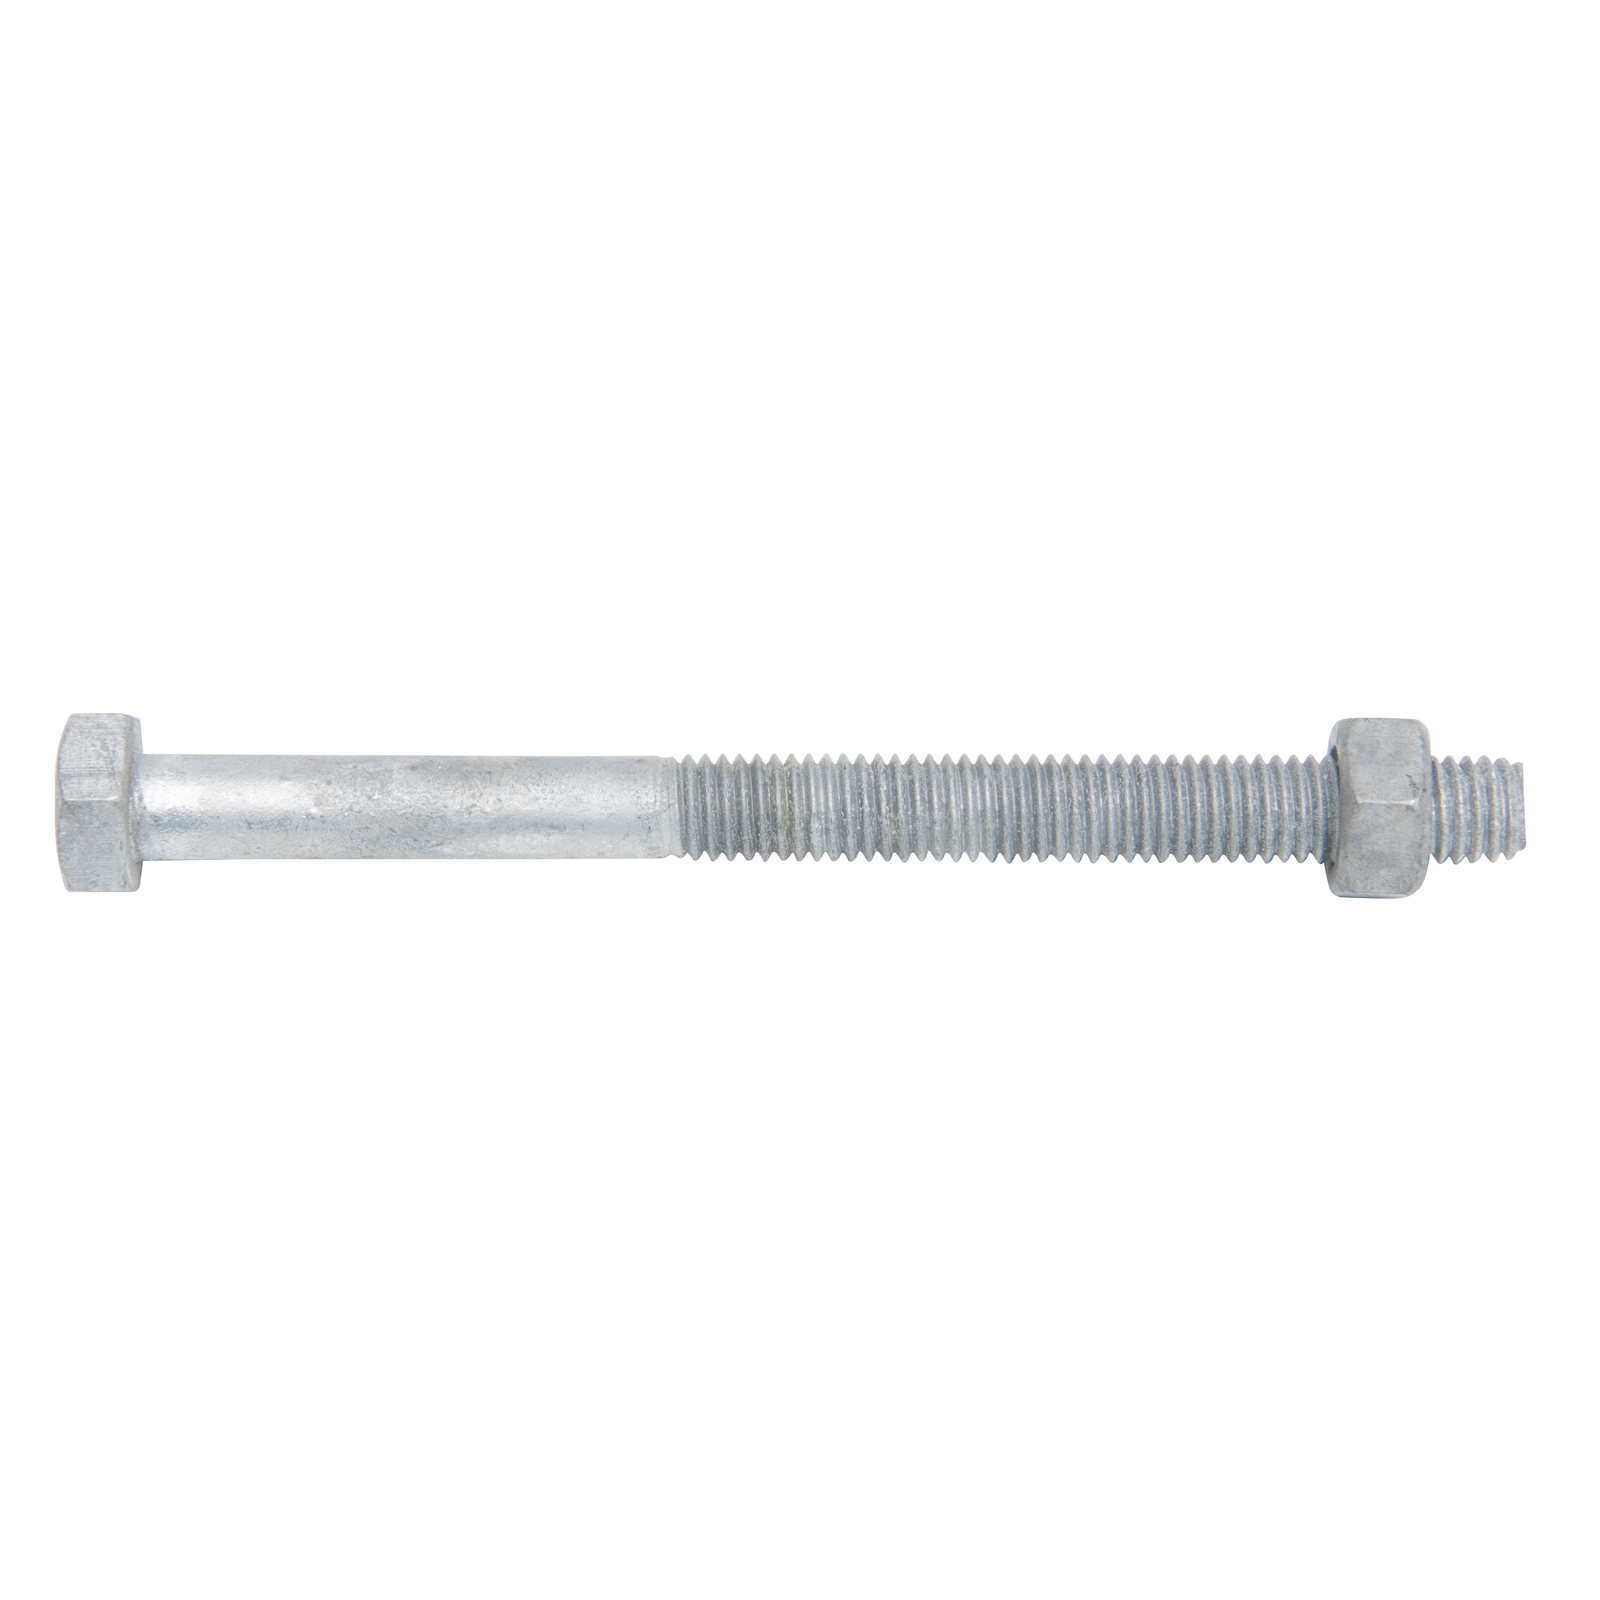 Zenith M8 x 100mm Galvanised Hex Head Bolt and Nut